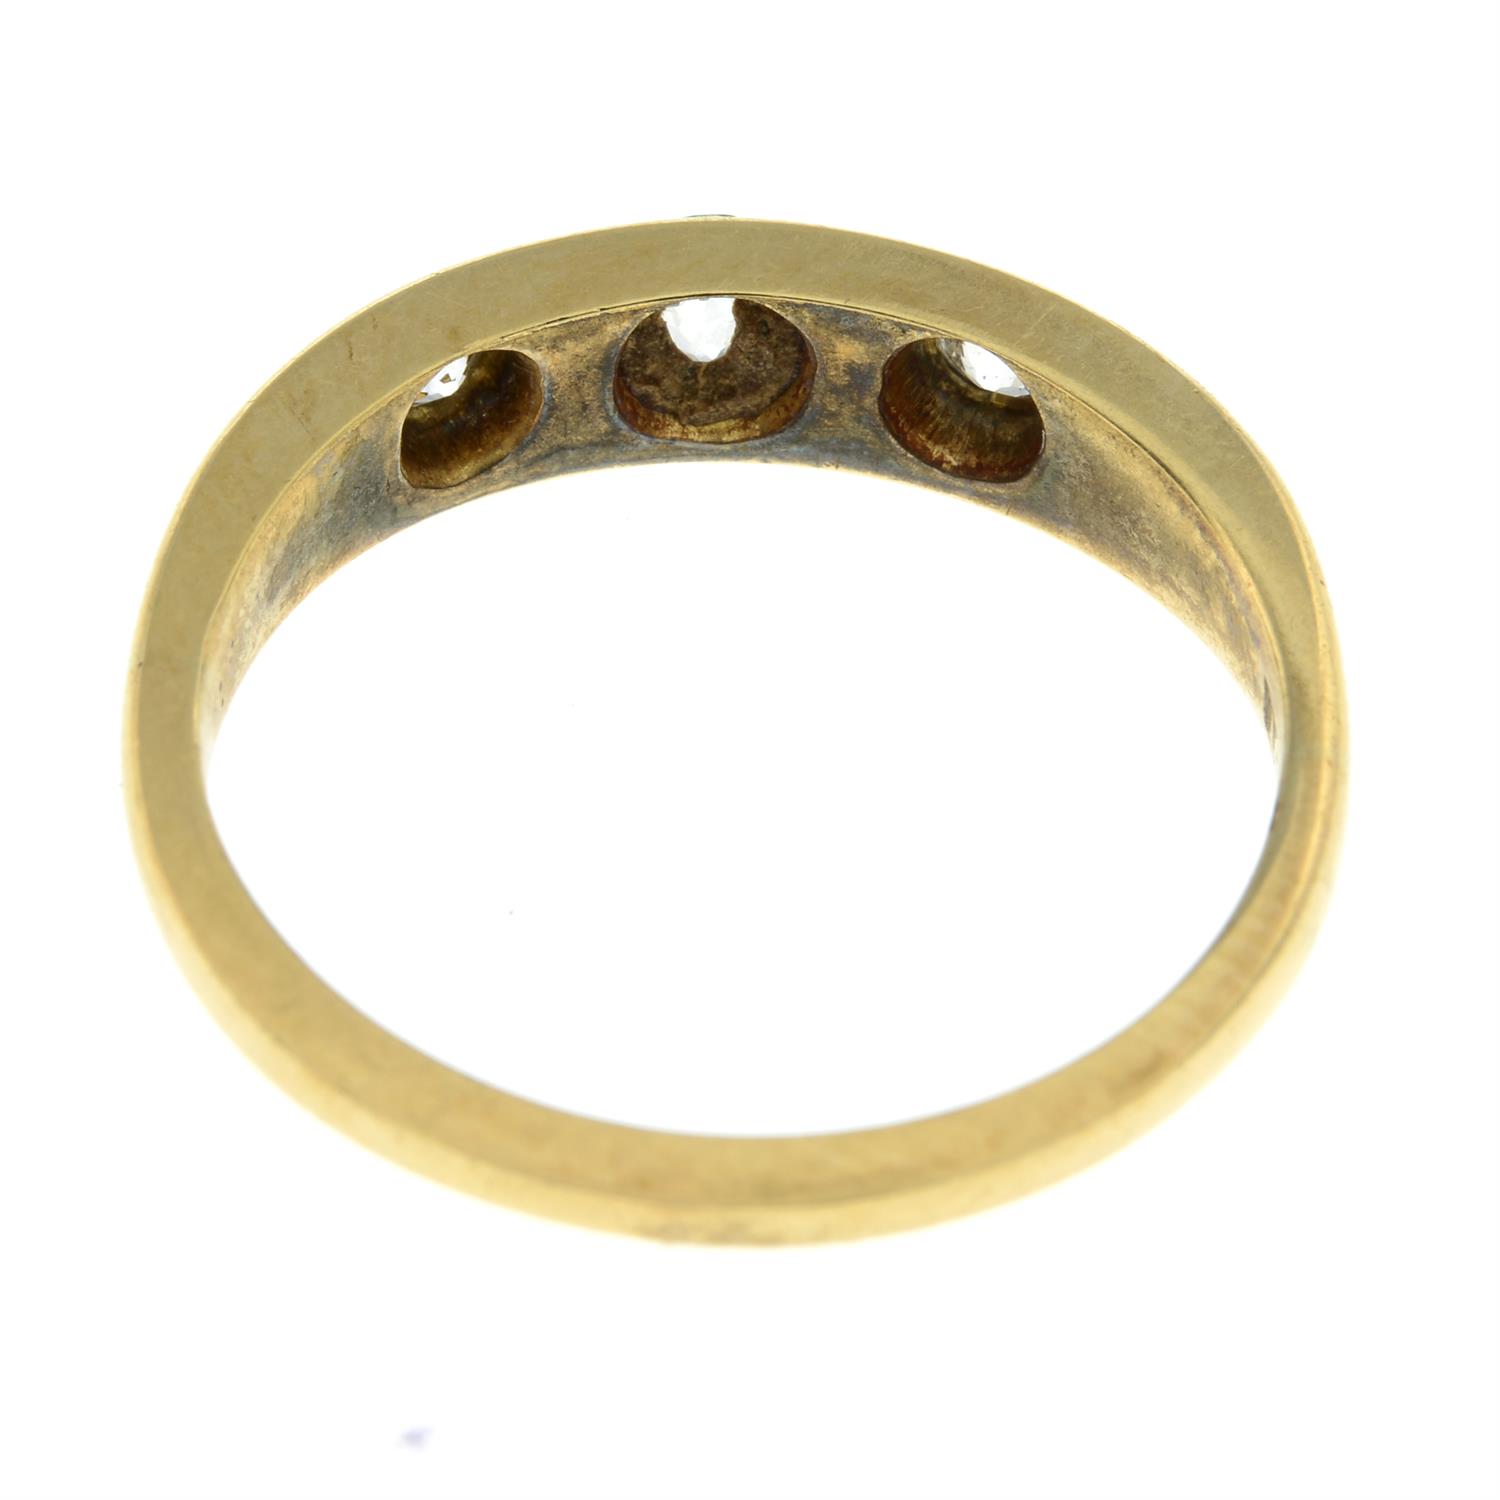 Early 20th century 18ct gold old-cut diamond ring - Image 2 of 2